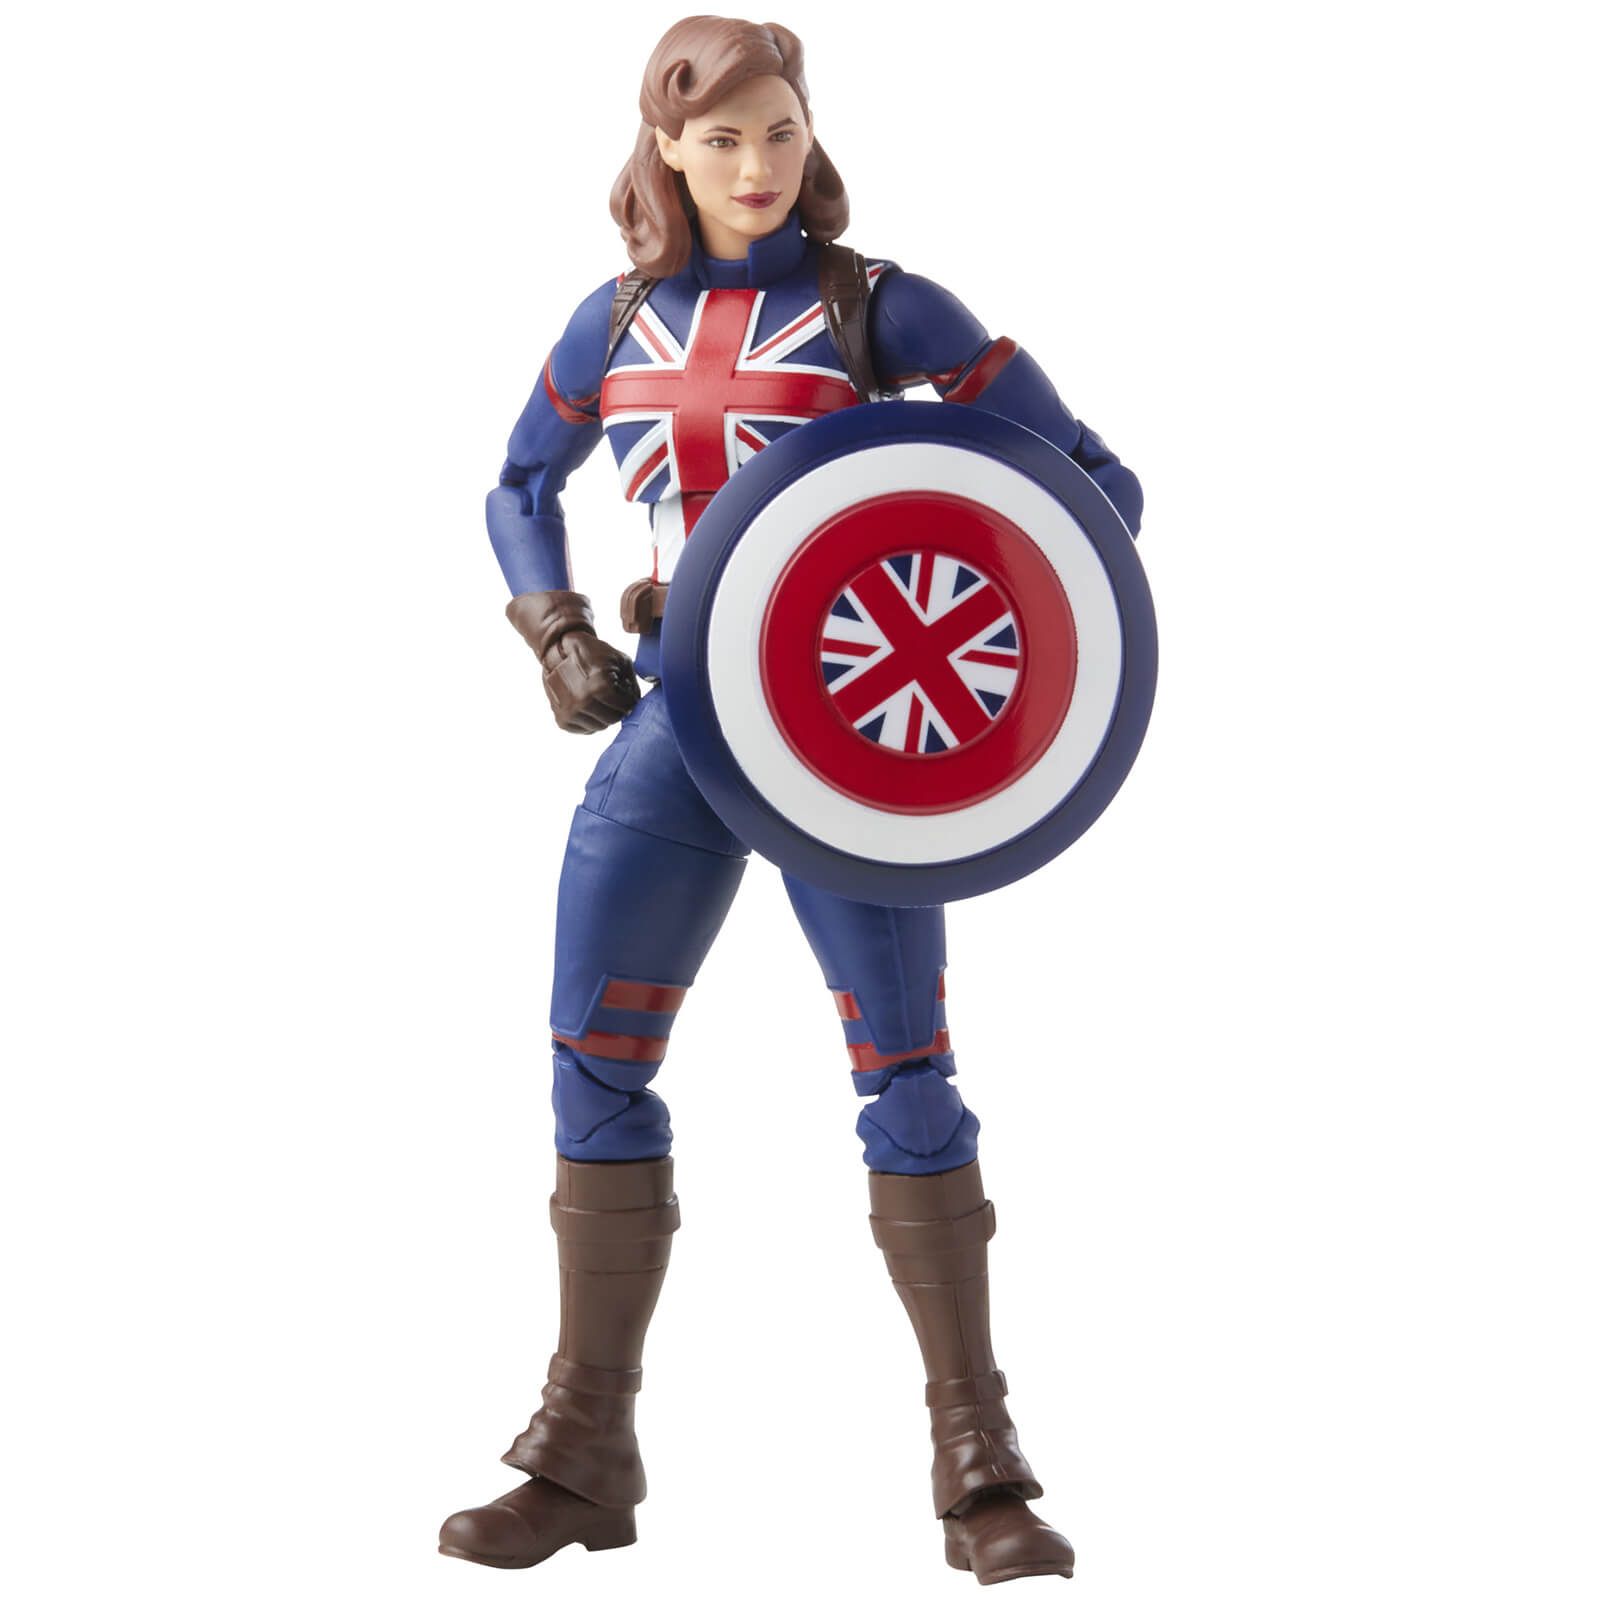 Hasbro Marvel Legends Series Marvel’s Captain Carter What If Action Figure and Build-a-Figure Parts